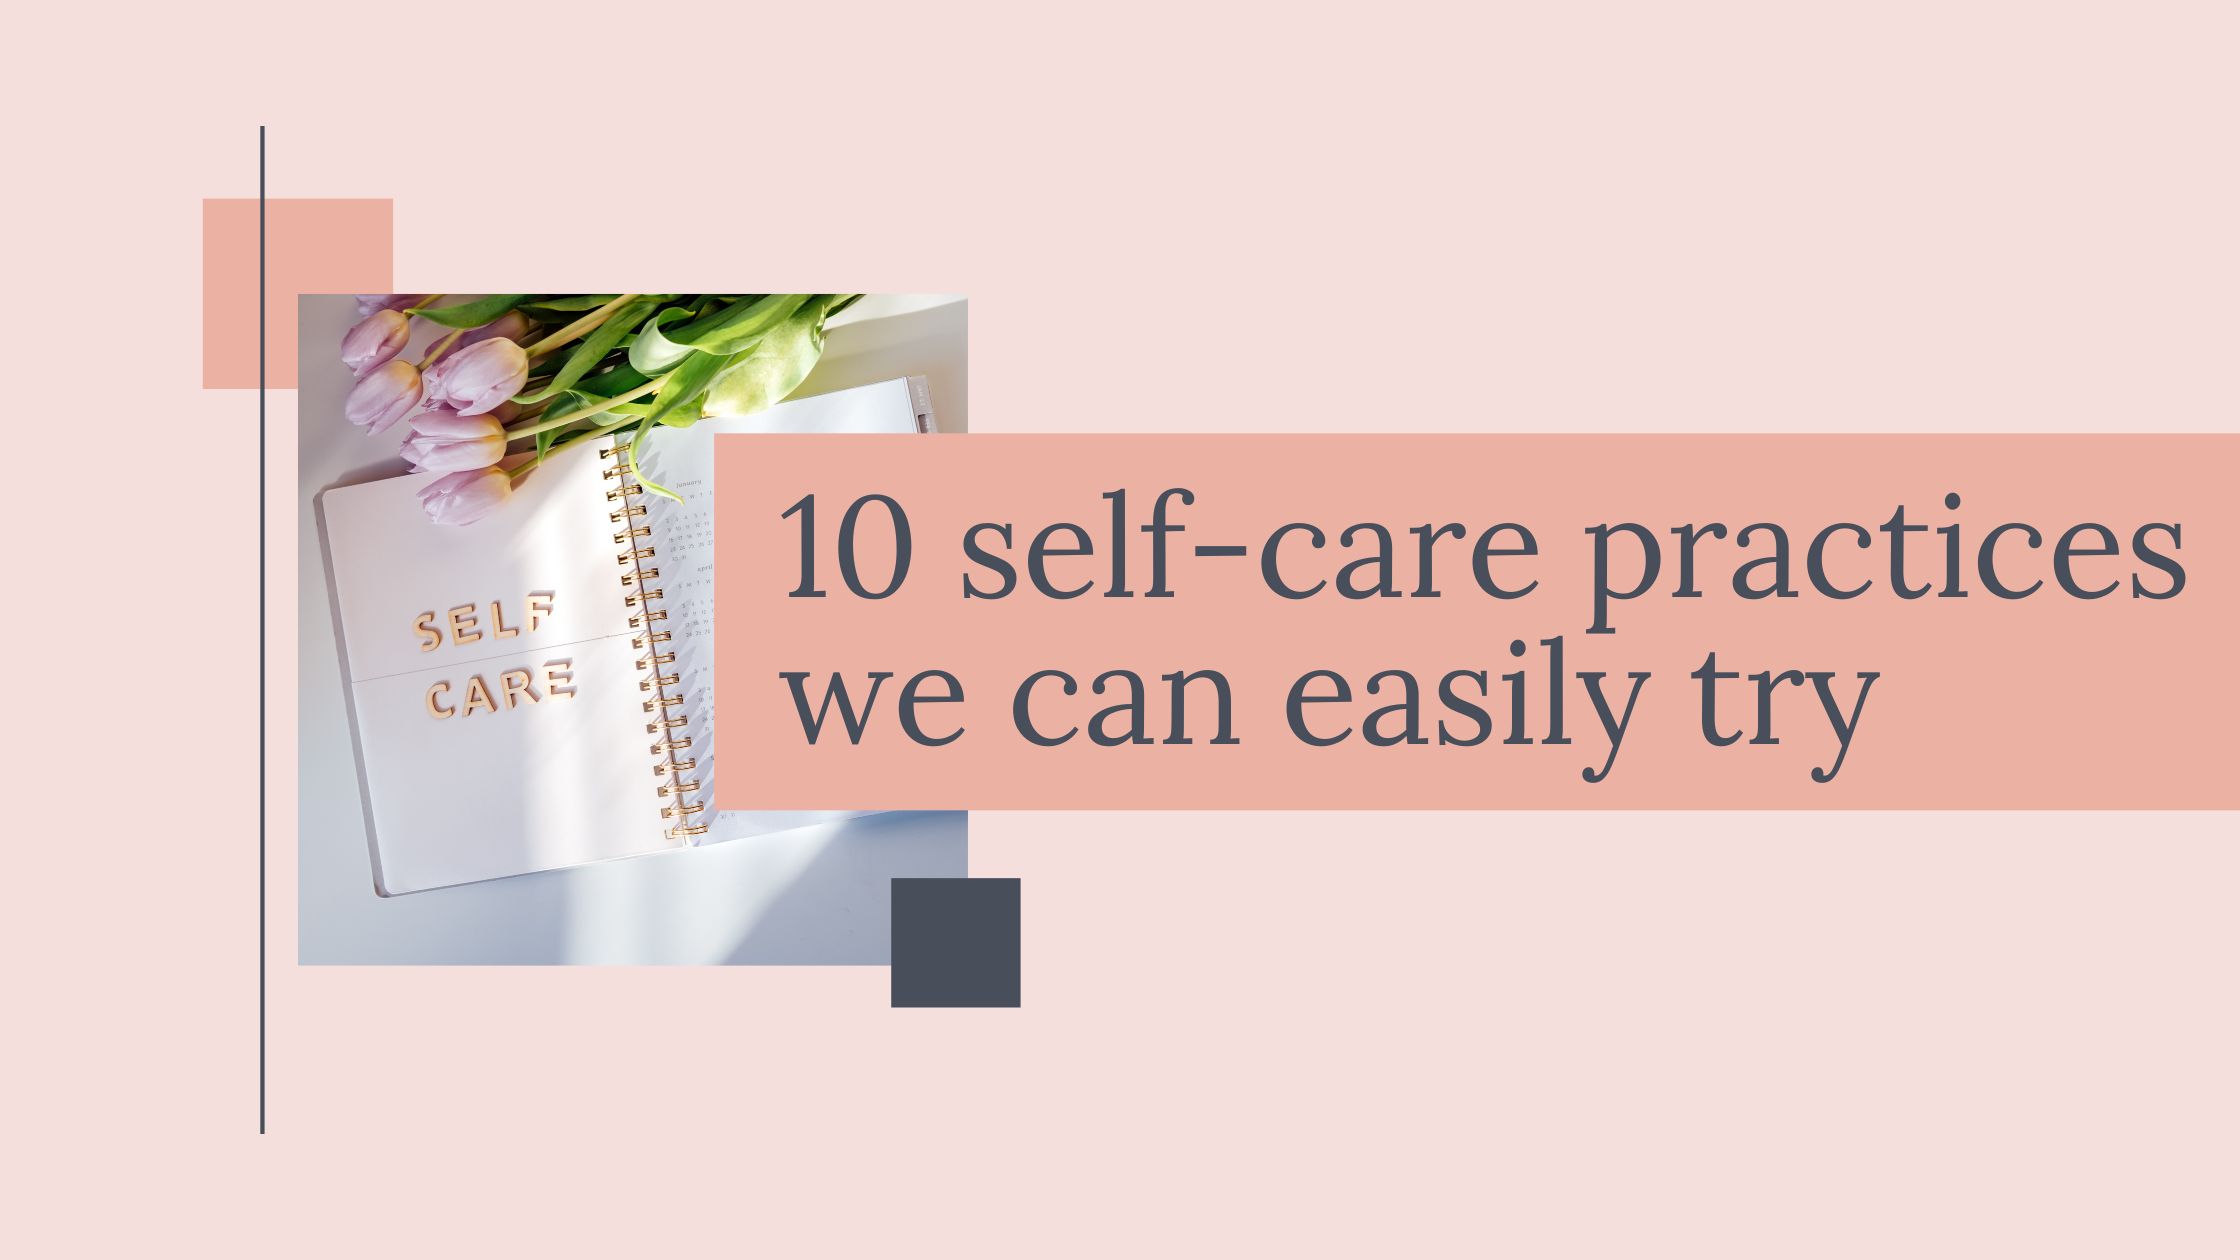 10 self-care practices we can easily try